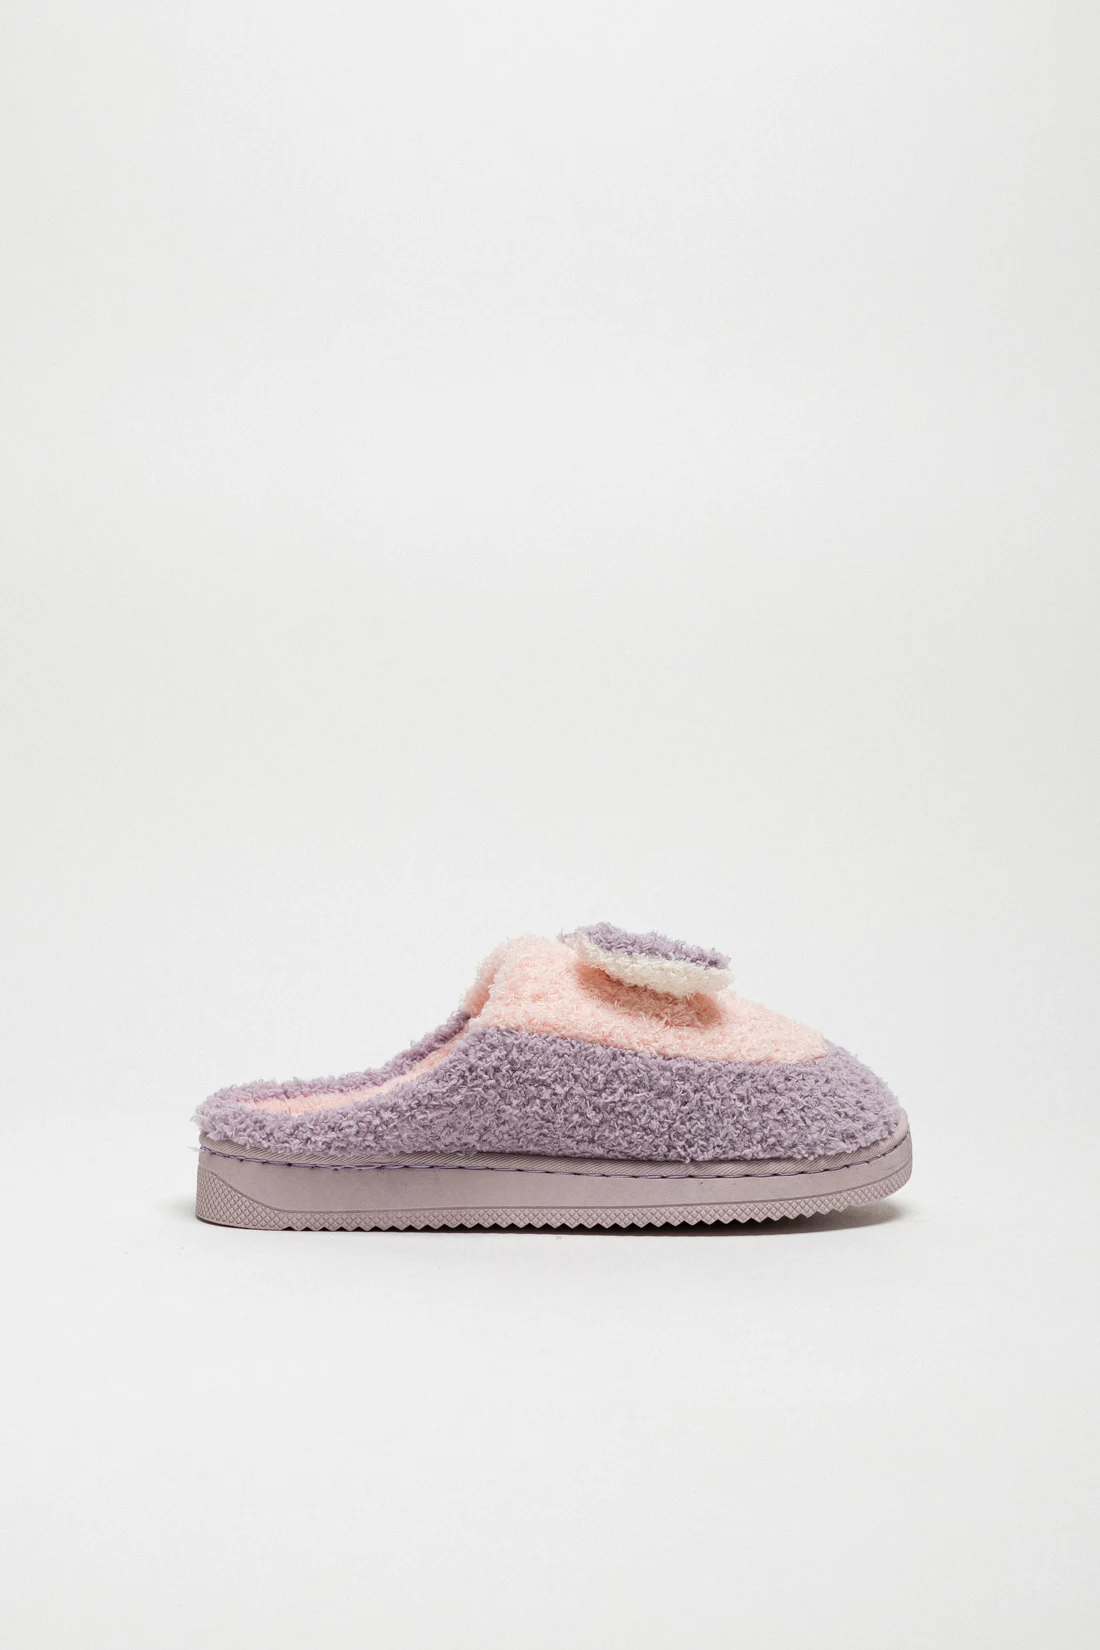 BERRY SNEAKERS - LILAC